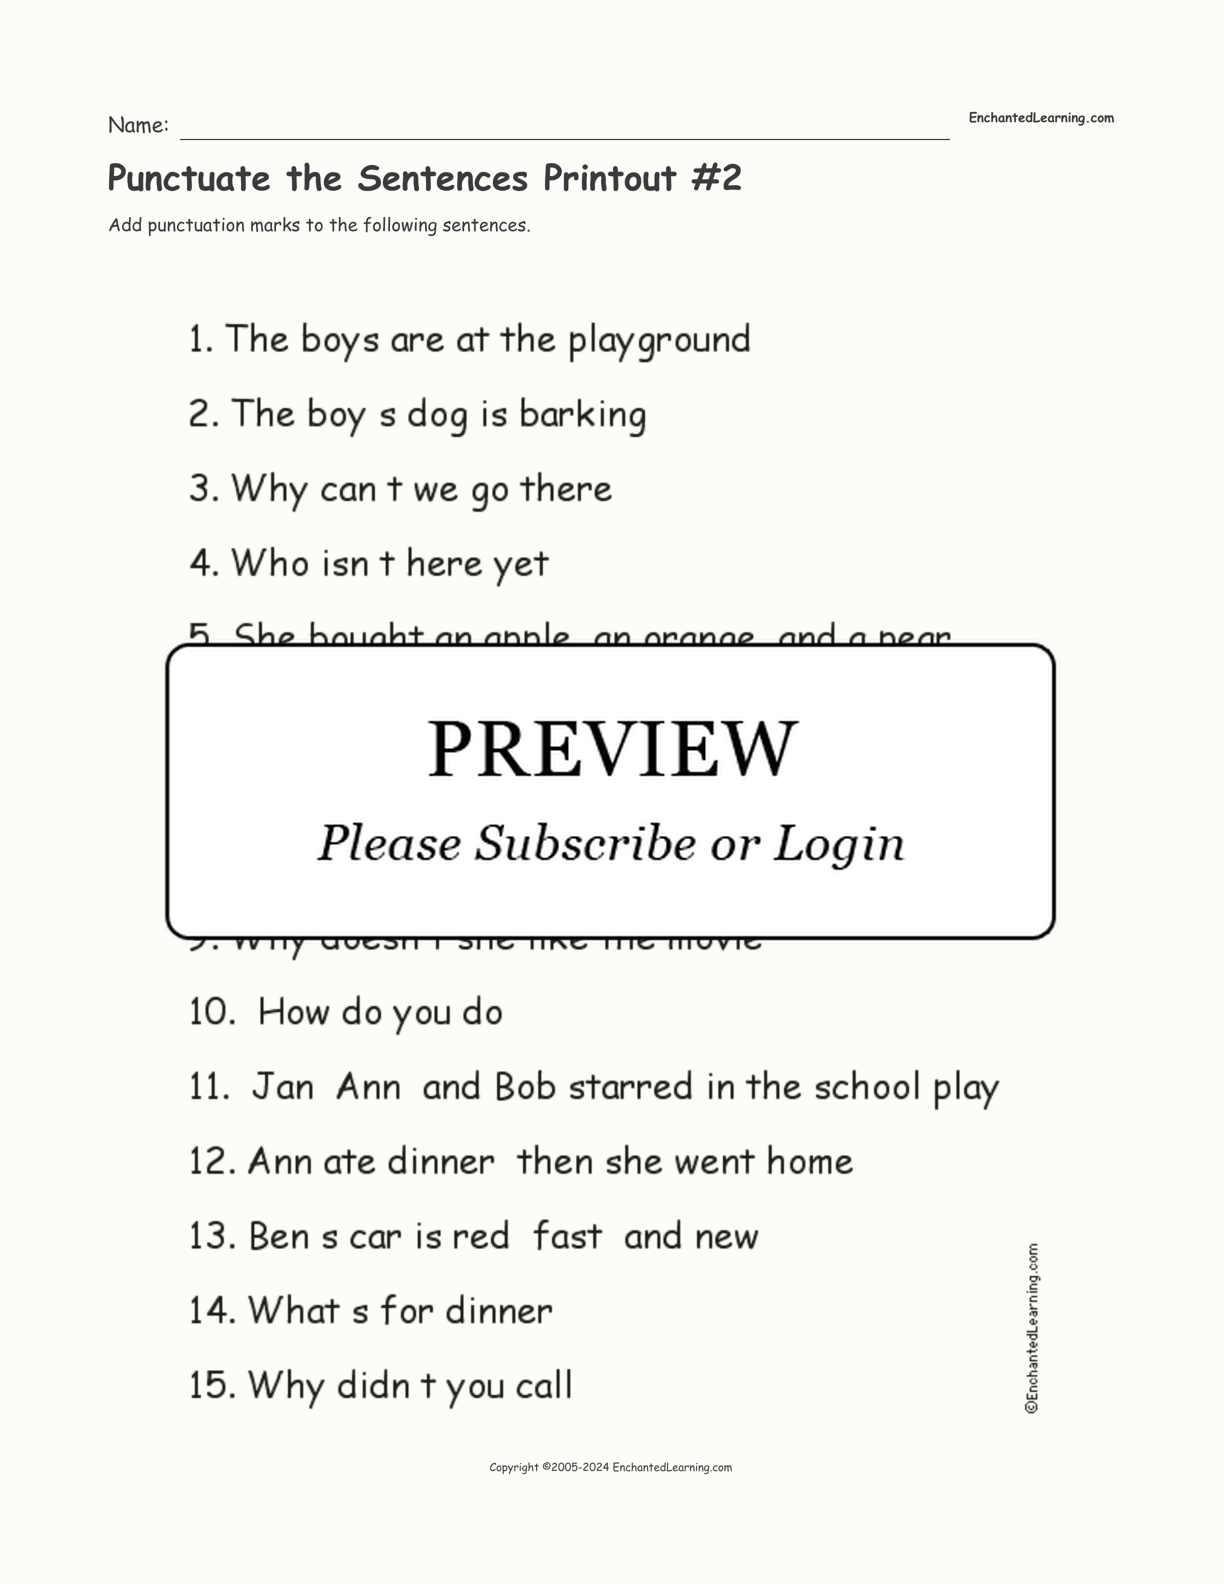 Punctuate the Sentences Printout #2 interactive worksheet page 1